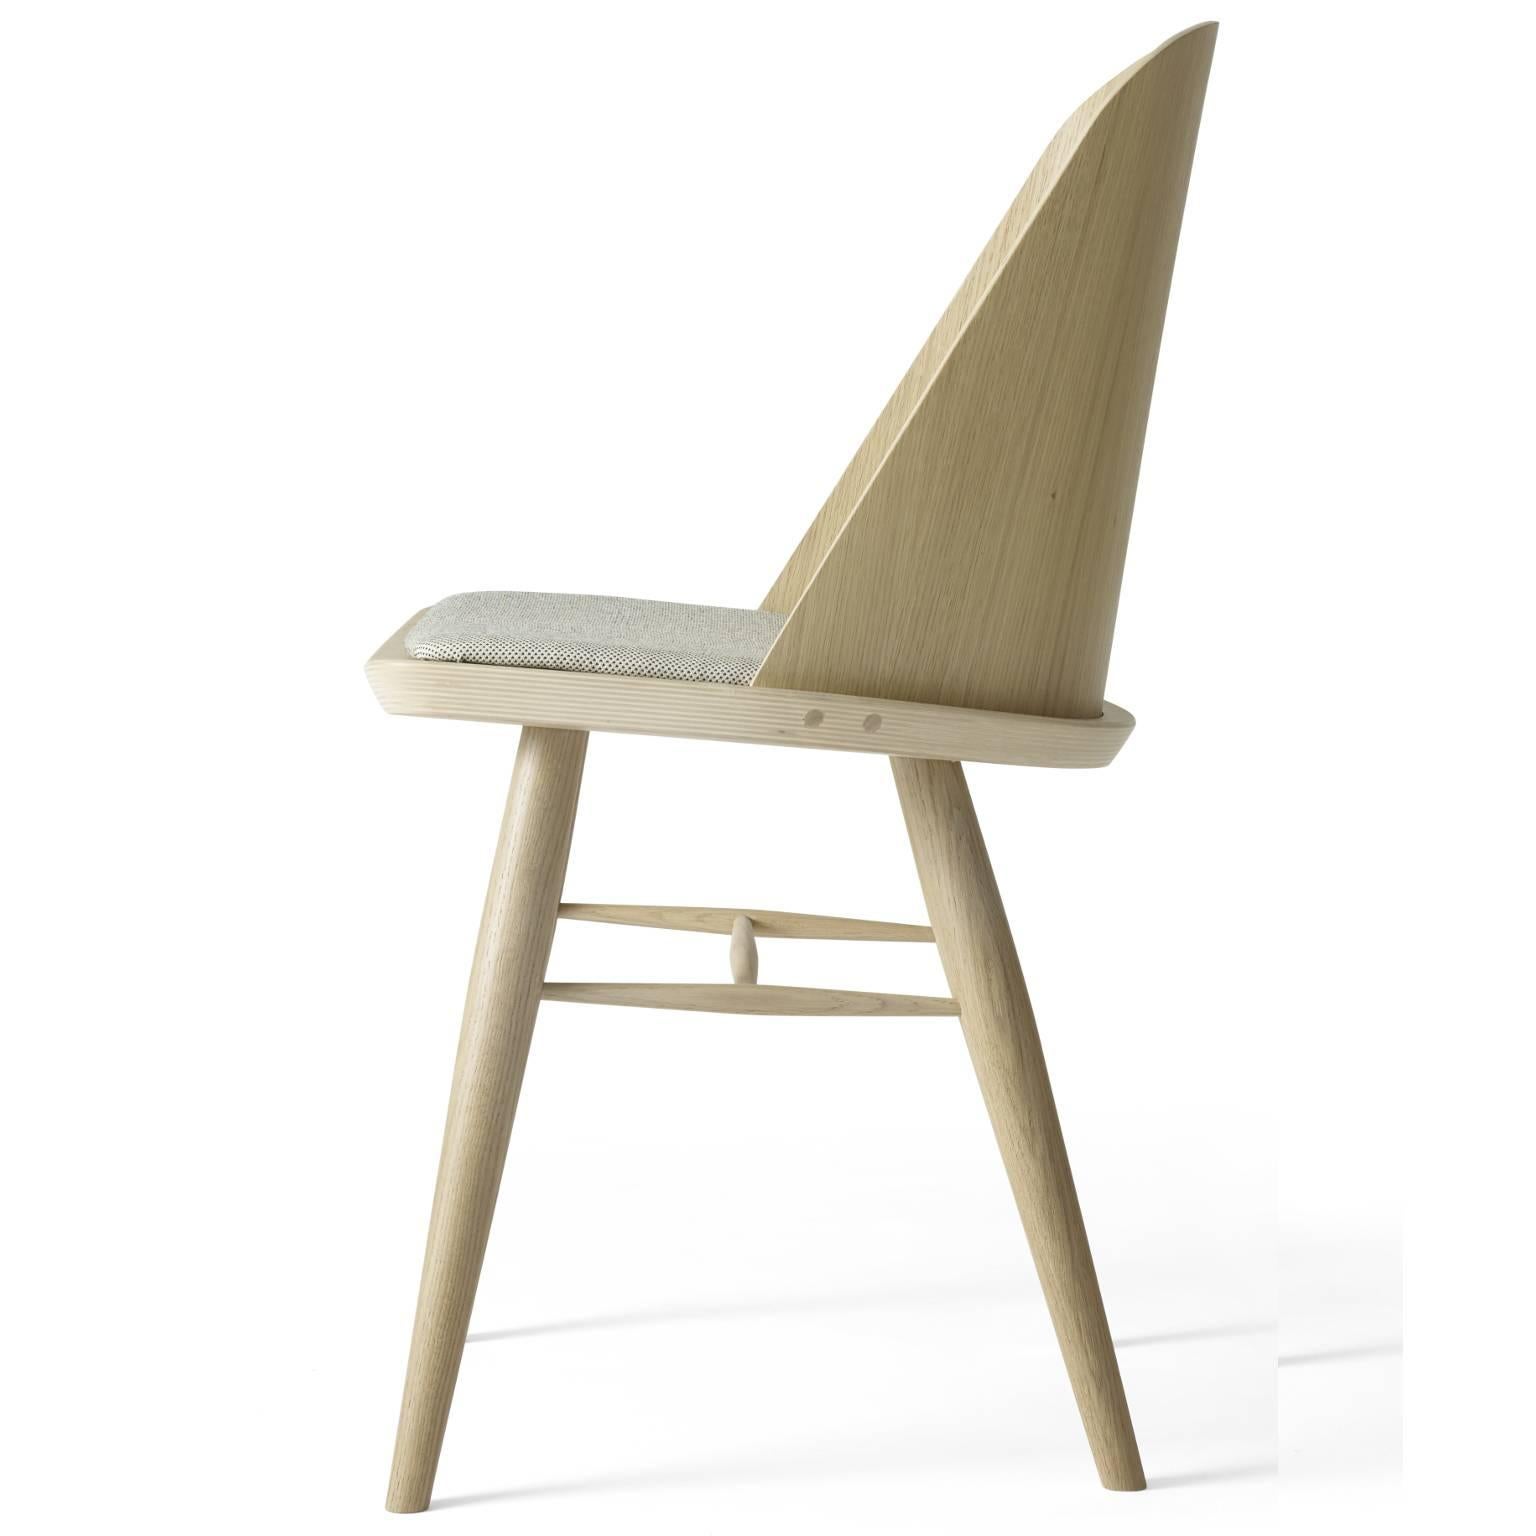 Less is more with Synnes chair, a distinctively modern take on the Classic Scandinavian dining chair from one of the region's most exciting young designers, Falke Svatun. The chair came to life when the Norwegian had the idea of inserting a sheet of